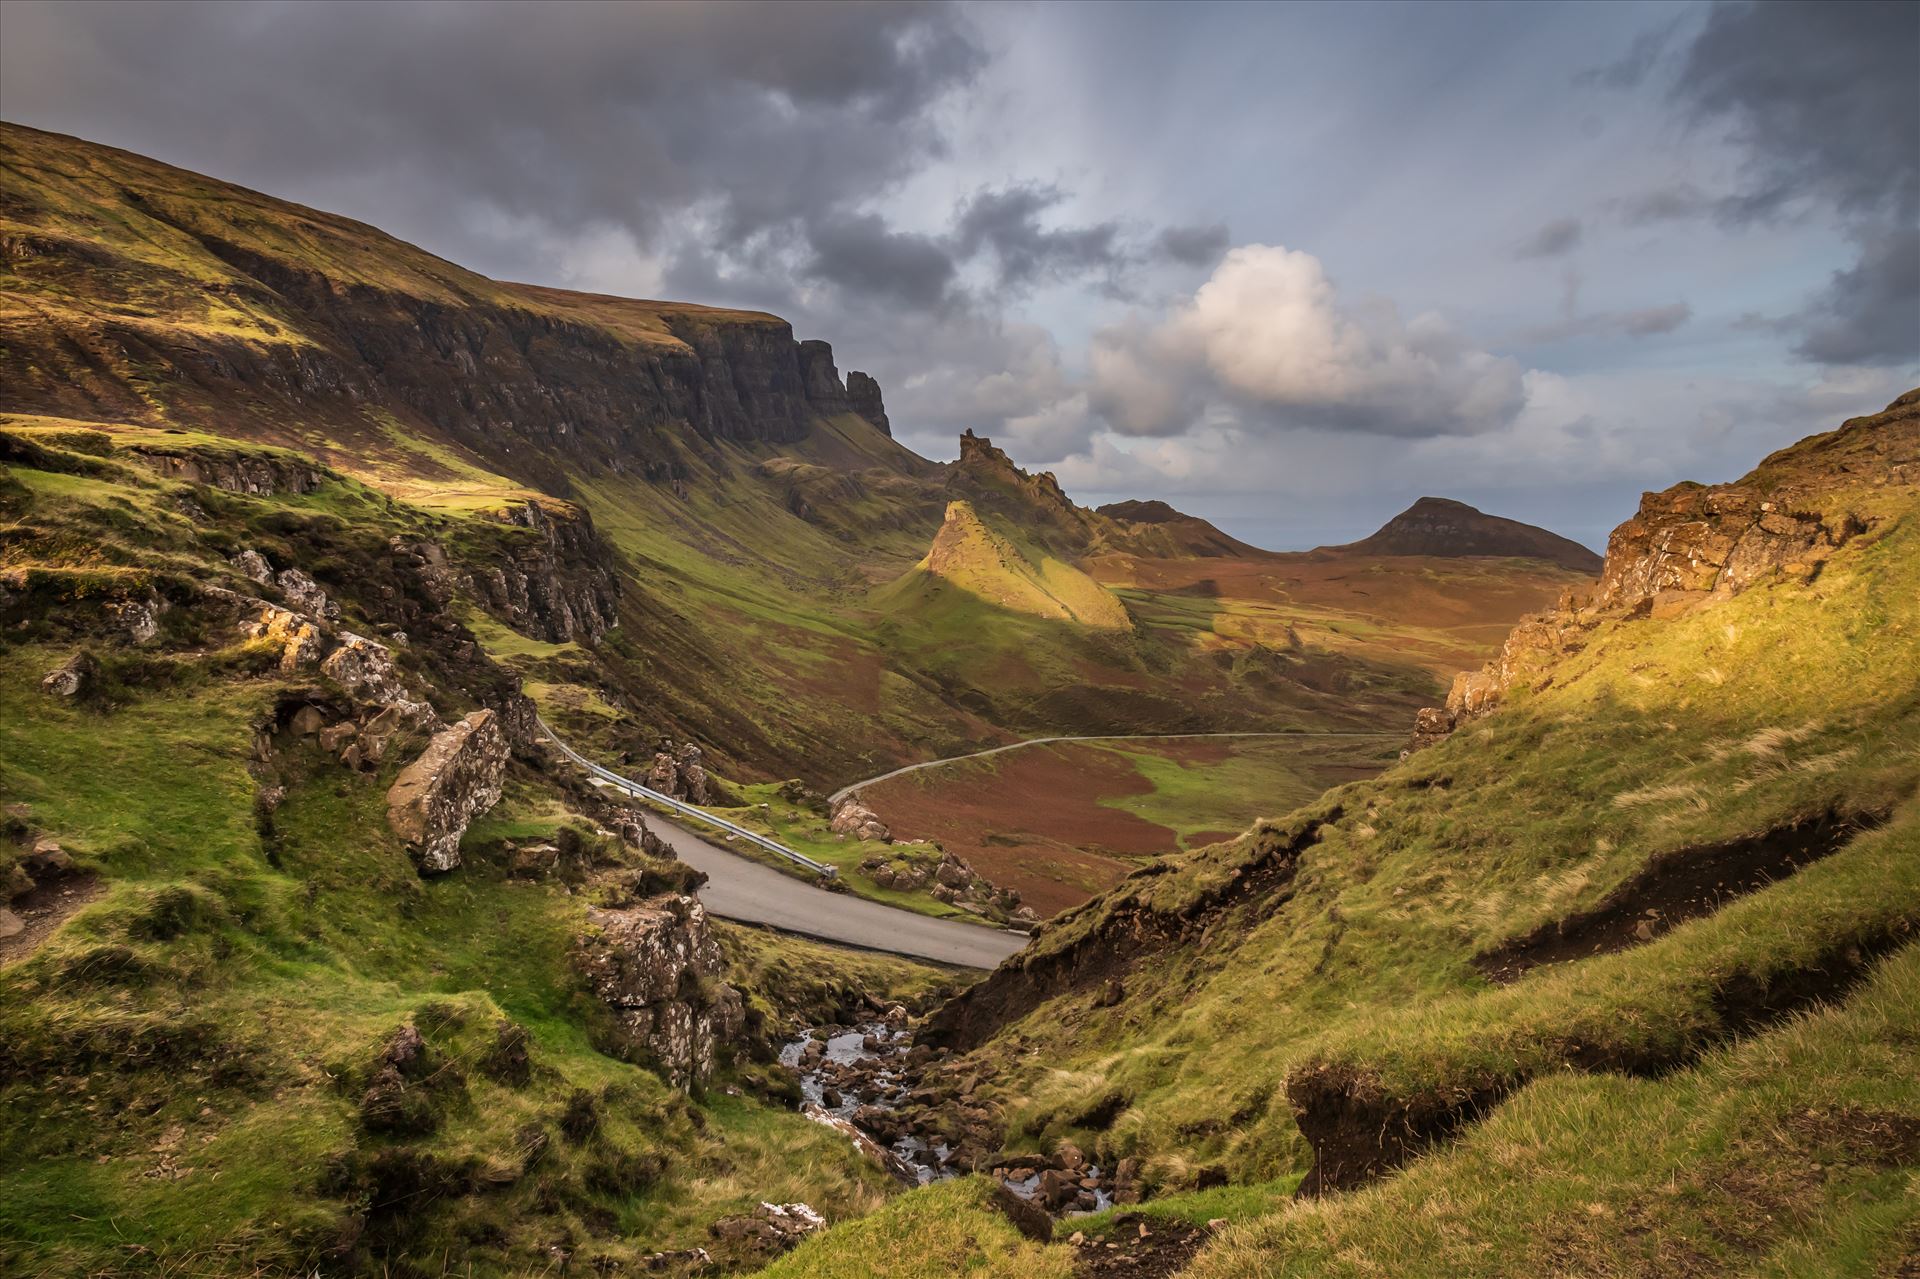 The Quiraing (1) The Quiraing is a landslip on the northernmost summit of the Trotternish on the Isle of Skye. The whole of the Trotternish Ridge escarpment was formed by a great series of landslips, the Quiraing is the only part of the slip still moving. by philreay